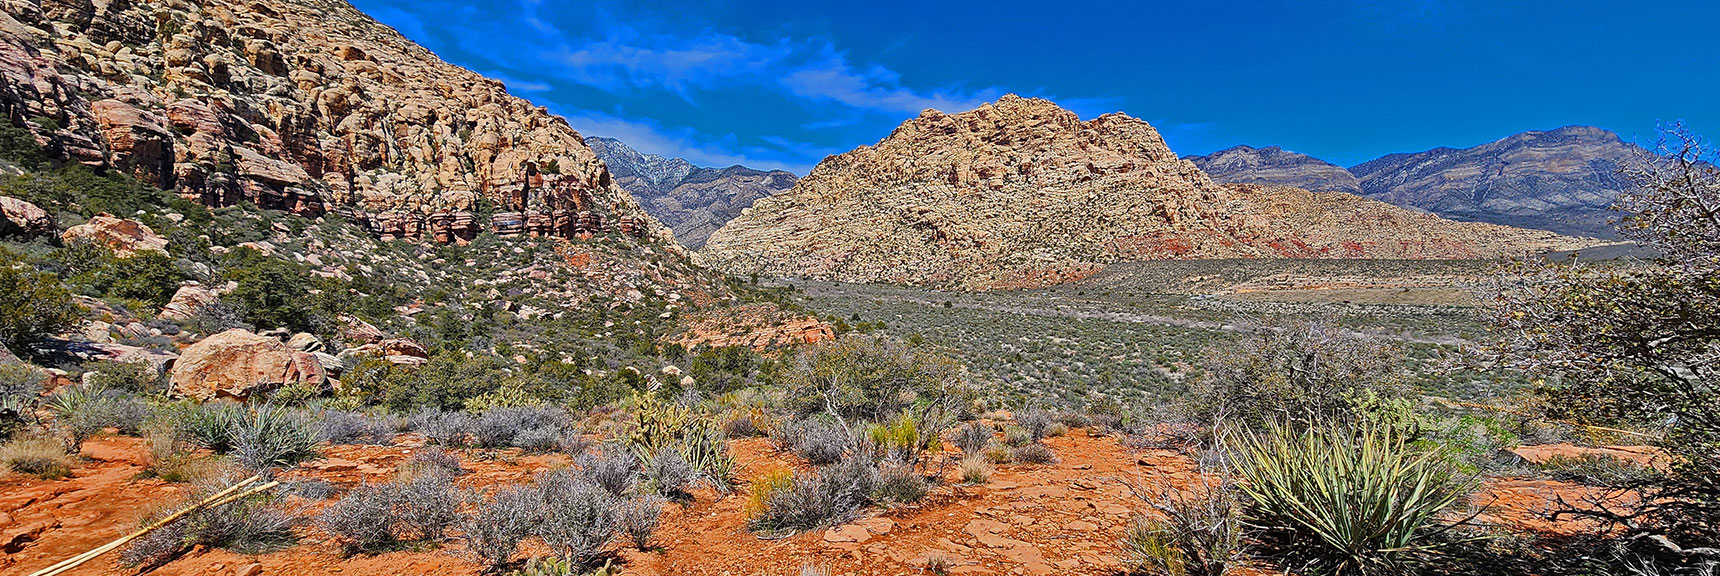 Lower Willow Spring Trailhead Area is Distant Target at White Rock Mountain | SMYC Trail | Red Rock Canyon National Conservation Area, Nevada | David Smith | LasVegasAreaTrails.com